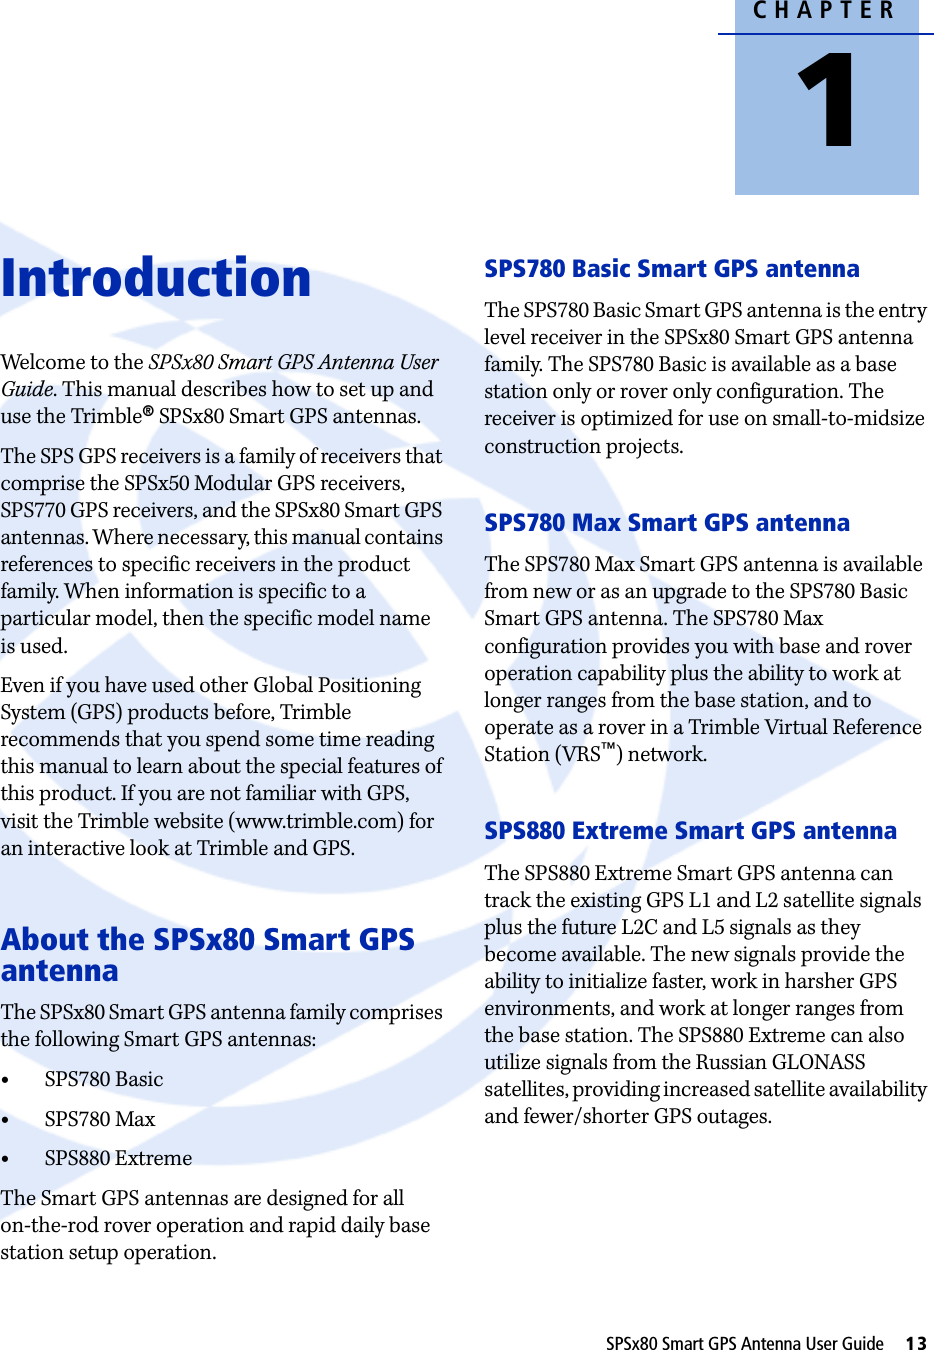 CHAPTER1SPSx80 Smart GPS Antenna User Guide     13Introduction 1Welcome to the SPSx80 Smart GPS Antenna User Guide. This manual describes how to set up and use the Trimble® SPSx80 Smart GPS antennas. The SPS GPS receivers is a family of receivers that comprise the SPSx50 Modular GPS receivers, SPS770 GPS receivers, and the SPSx80 Smart GPS antennas. Where necessary, this manual contains references to specific receivers in the product family. When information is specific to a particular model, then the specific model name is used. Even if you have used other Global Positioning System (GPS) products before, Trimble recommends that you spend some time reading this manual to learn about the special features of this product. If you are not familiar with GPS, visit the Trimble website (www.trimble.com) for an interactive look at Trimble and GPS.About the SPSx80 Smart GPS antennaThe SPSx80 Smart GPS antenna family comprises the following Smart GPS antennas:•SPS780 Basic•SPS780 Max•SPS880 ExtremeThe Smart GPS antennas are designed for all on-the-rod rover operation and rapid daily base station setup operation.SPS780 Basic Smart GPS antennaThe SPS780 Basic Smart GPS antenna is the entry level receiver in the SPSx80 Smart GPS antenna family. The SPS780 Basic is available as a base station only or rover only configuration. The receiver is optimized for use on small-to-midsize construction projects. SPS780 Max Smart GPS antennaThe SPS780 Max Smart GPS antenna is available from new or as an upgrade to the SPS780 Basic Smart GPS antenna. The SPS780 Max configuration provides you with base and rover operation capability plus the ability to work at longer ranges from the base station, and to operate as a rover in a Trimble Virtual Reference Station (VRS™) network.SPS880 Extreme Smart GPS antennaThe SPS880 Extreme Smart GPS antenna can track the existing GPS L1 and L2 satellite signals plus the future L2C and L5 signals as they become available. The new signals provide the ability to initialize faster, work in harsher GPS environments, and work at longer ranges from the base station. The SPS880 Extreme can also utilize signals from the Russian GLONASS satellites, providing increased satellite availability and fewer/shorter GPS outages.